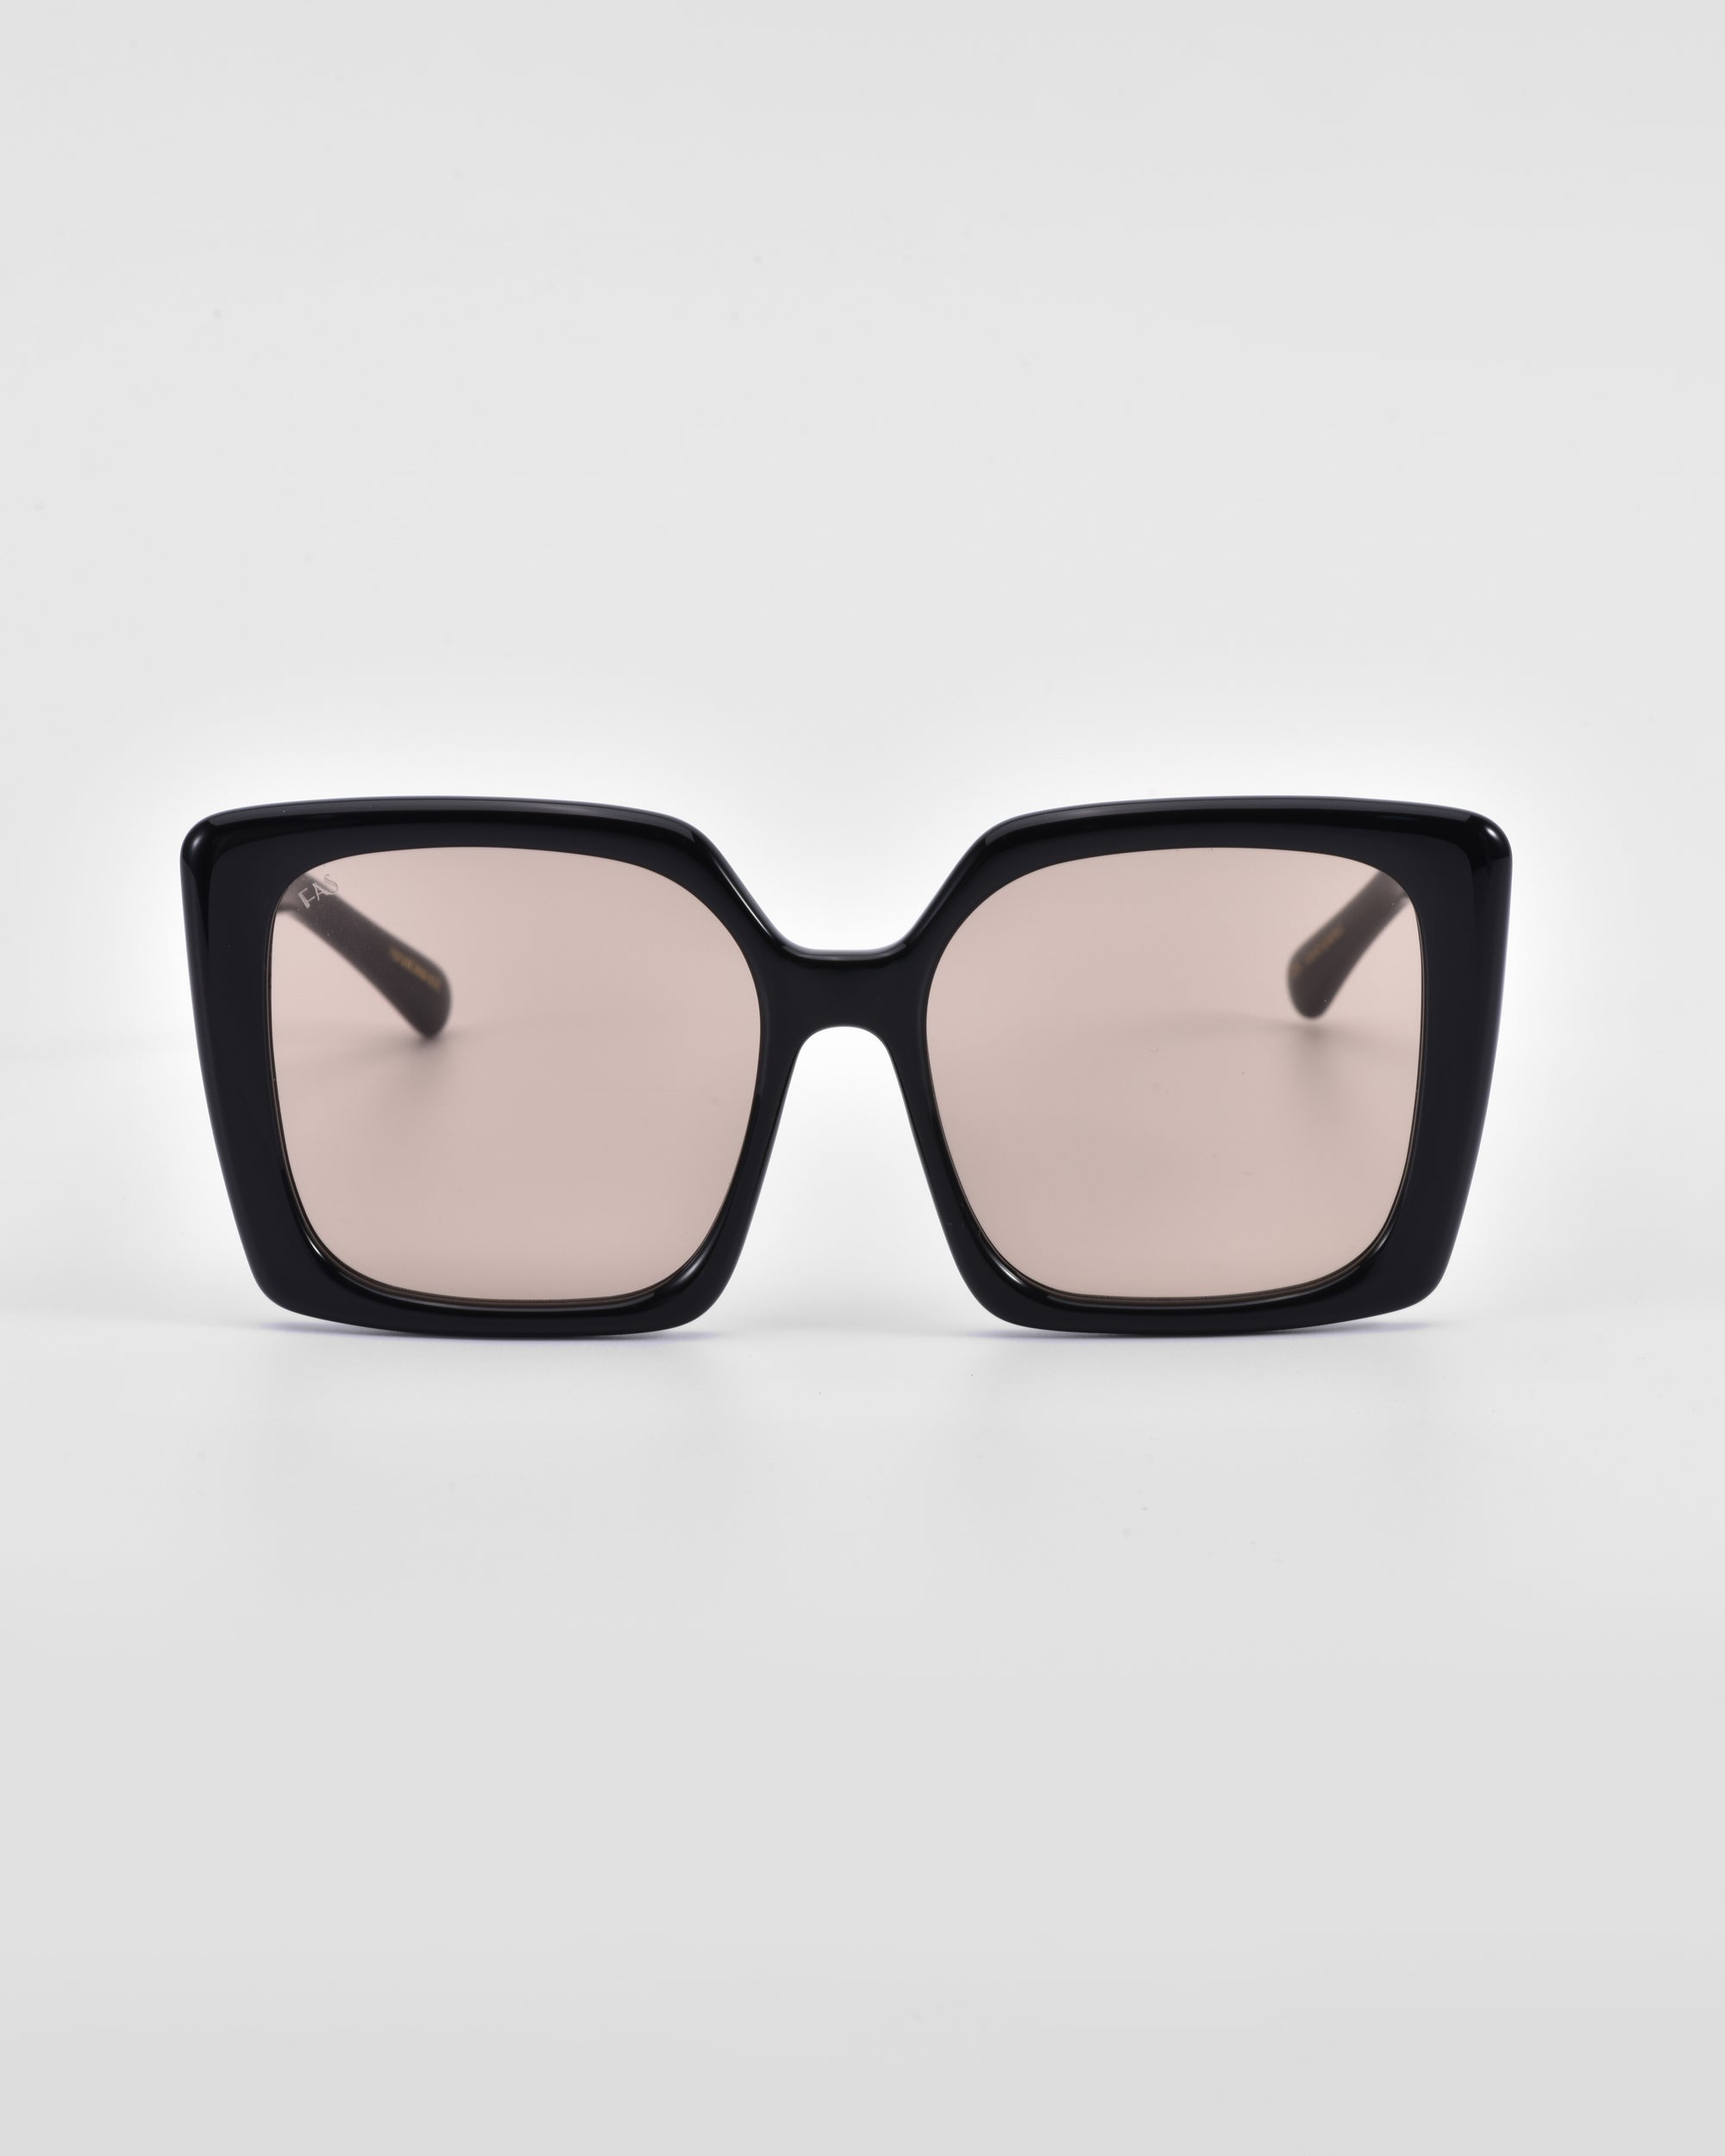 Front view of Eos oversized soft-square sunglasses by For Art&#39;s Sake® with black rims and pink-tinted lenses against a white background.